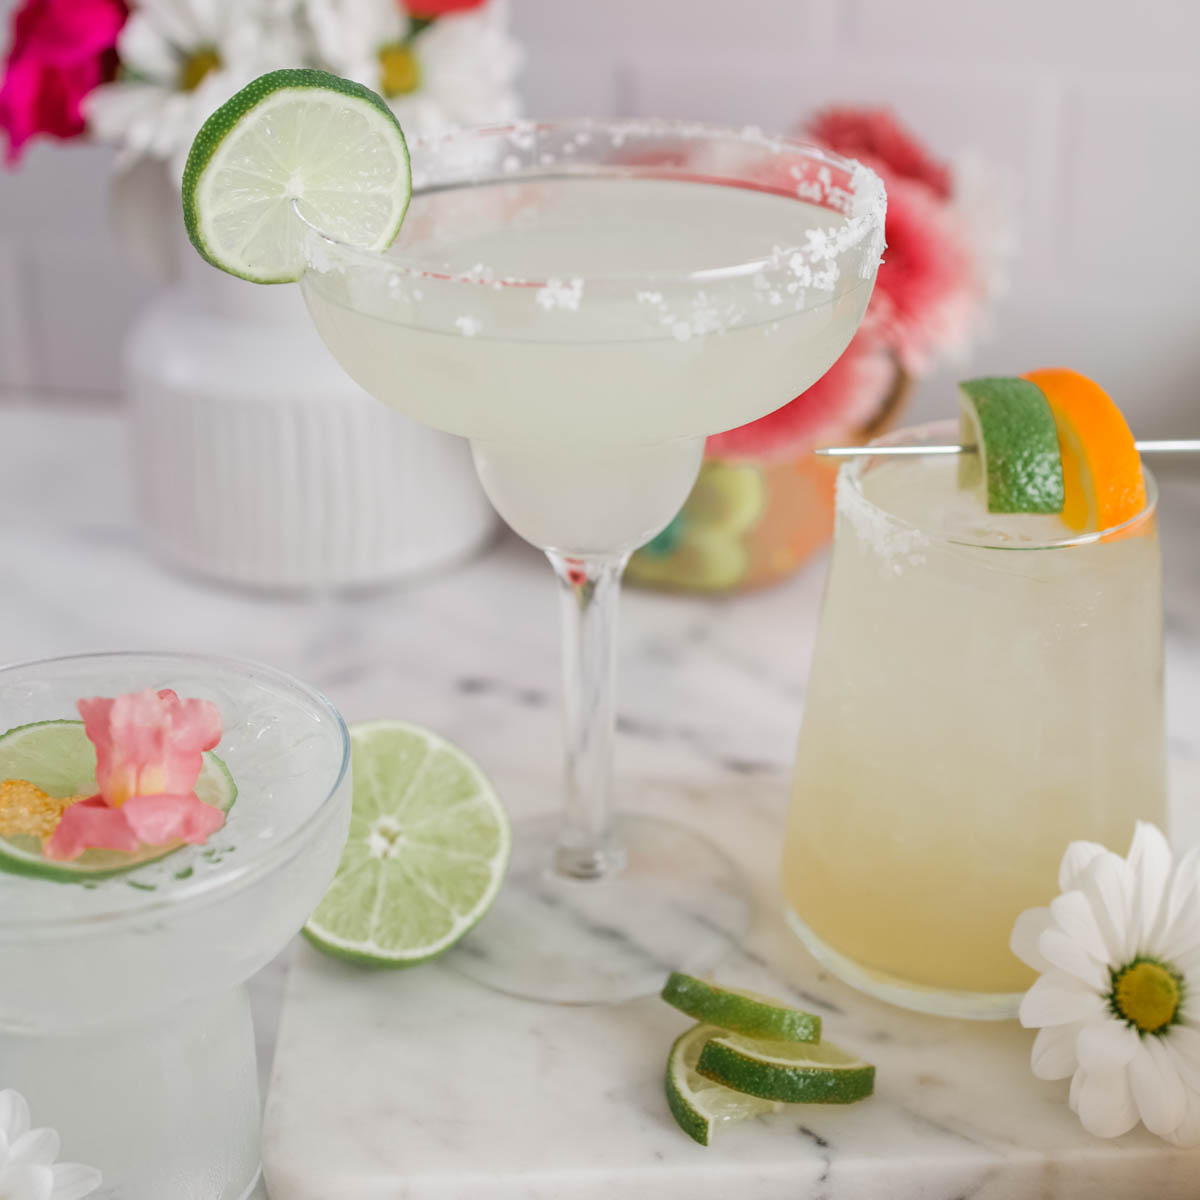 A margarita glass with a lime wedge on the side and a sugar rim, another glass with a slice of lime and pink flower petals on top, and a third smaller glass with a lime and orange slice.  